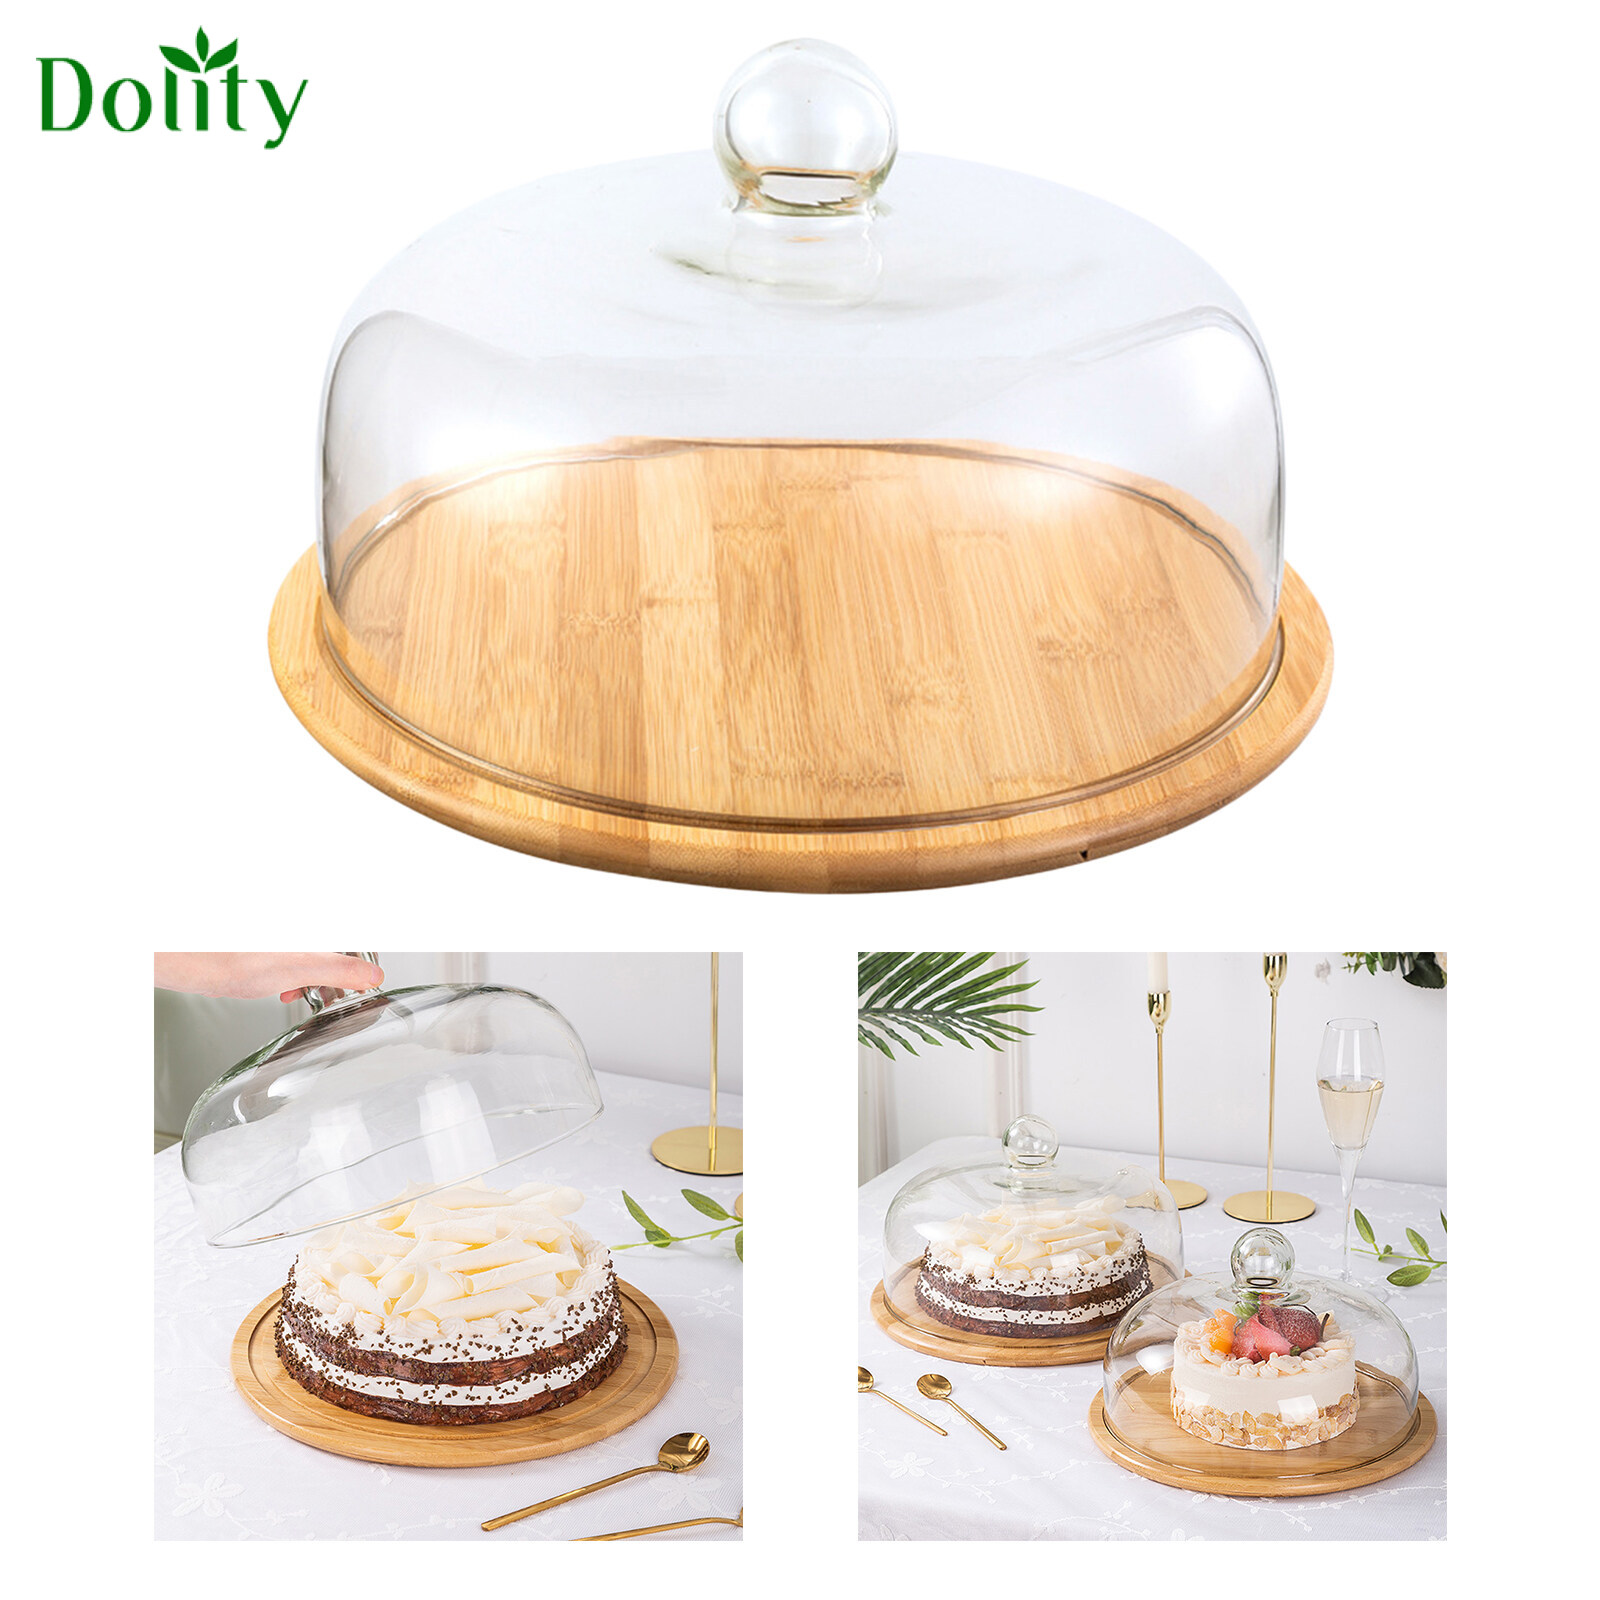 Medium Recycle Glass Display Cover Dome Cloche w/Ceramic Base 19cm by  Parlane 29 cm